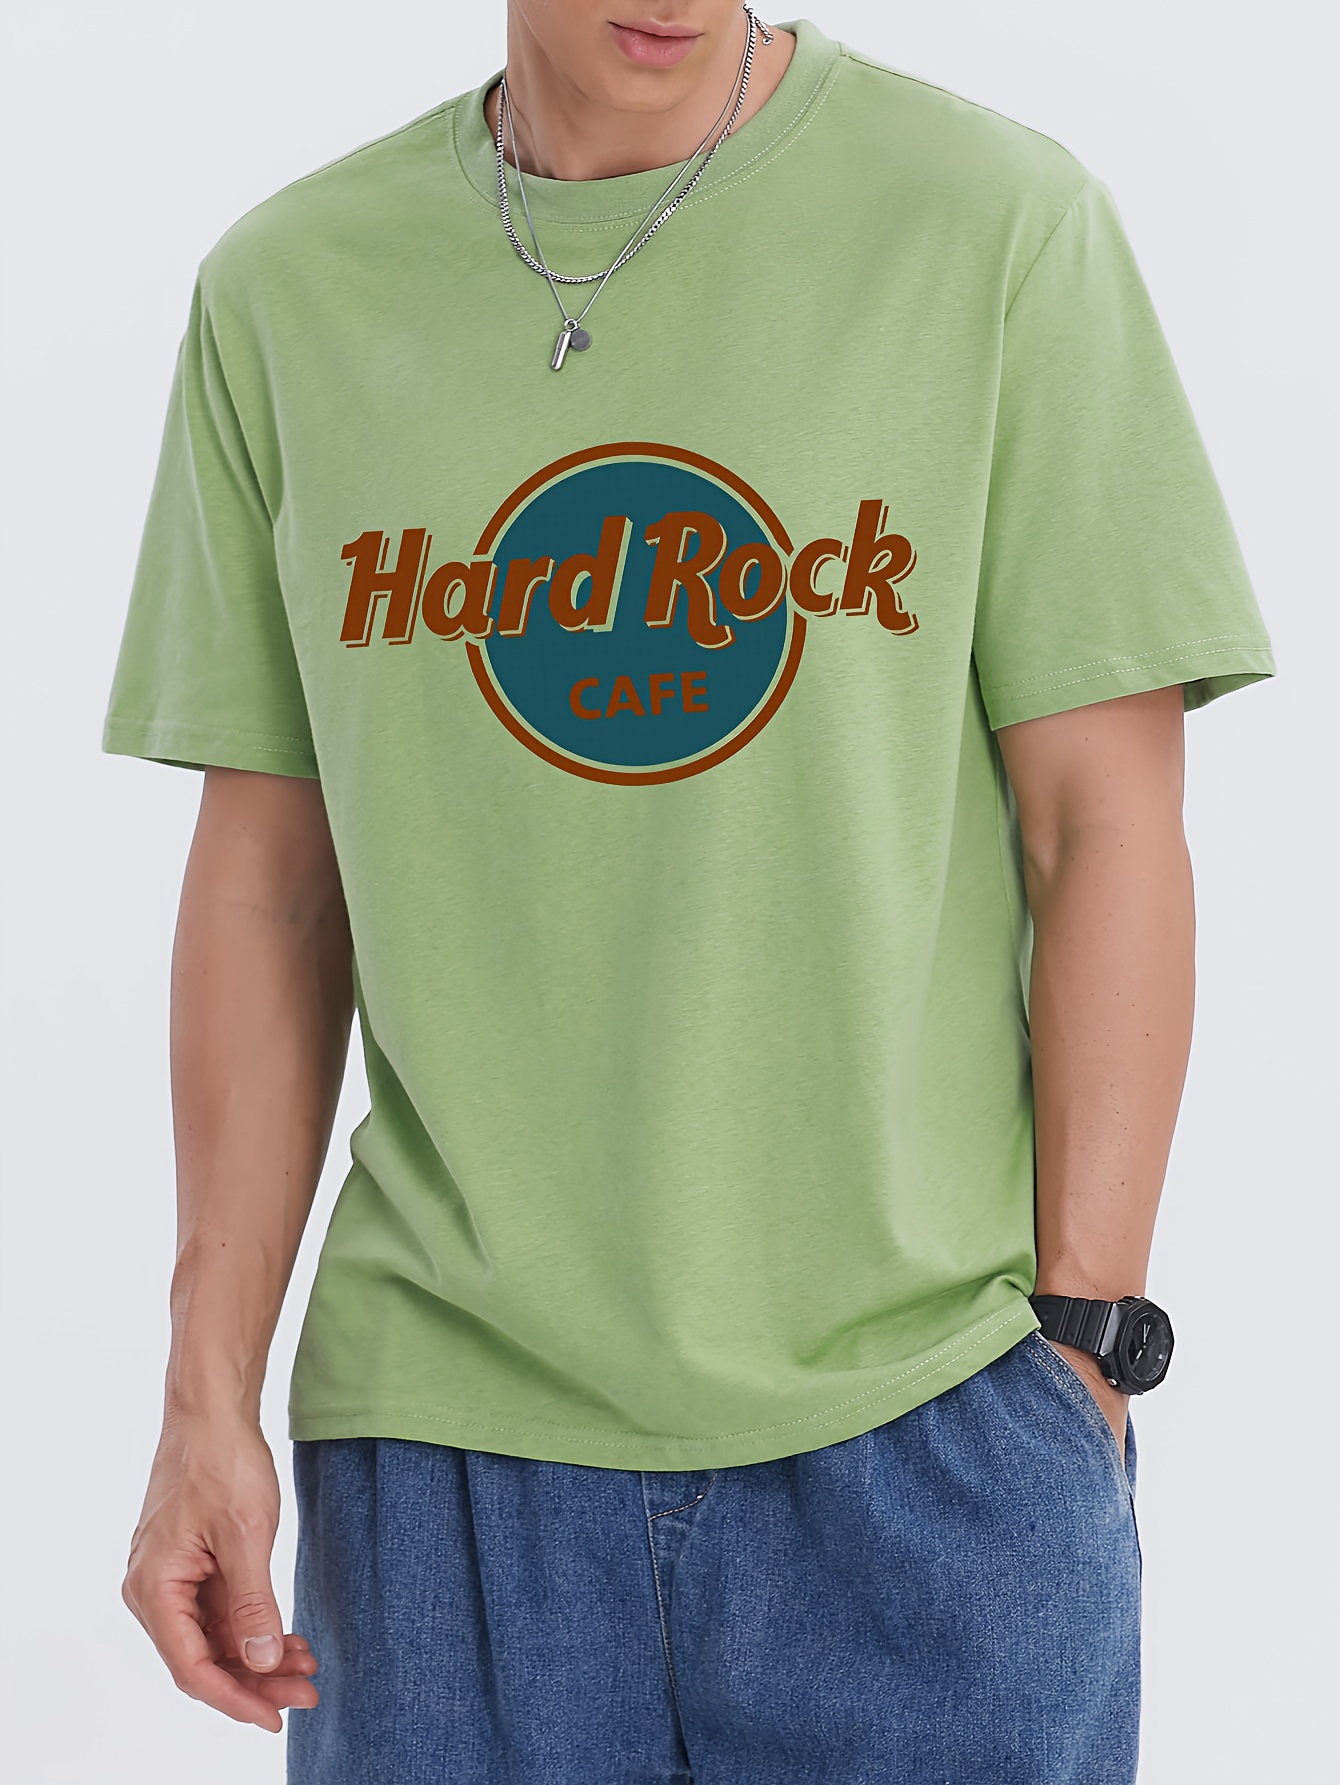 Creative Hard Rock Cafe Letter Print T-shirt, Stylish & Breathable Street Fashion For Men, Simple Comfy Top, Casual Crew Neck Short Sleeve T-shirt For Summer